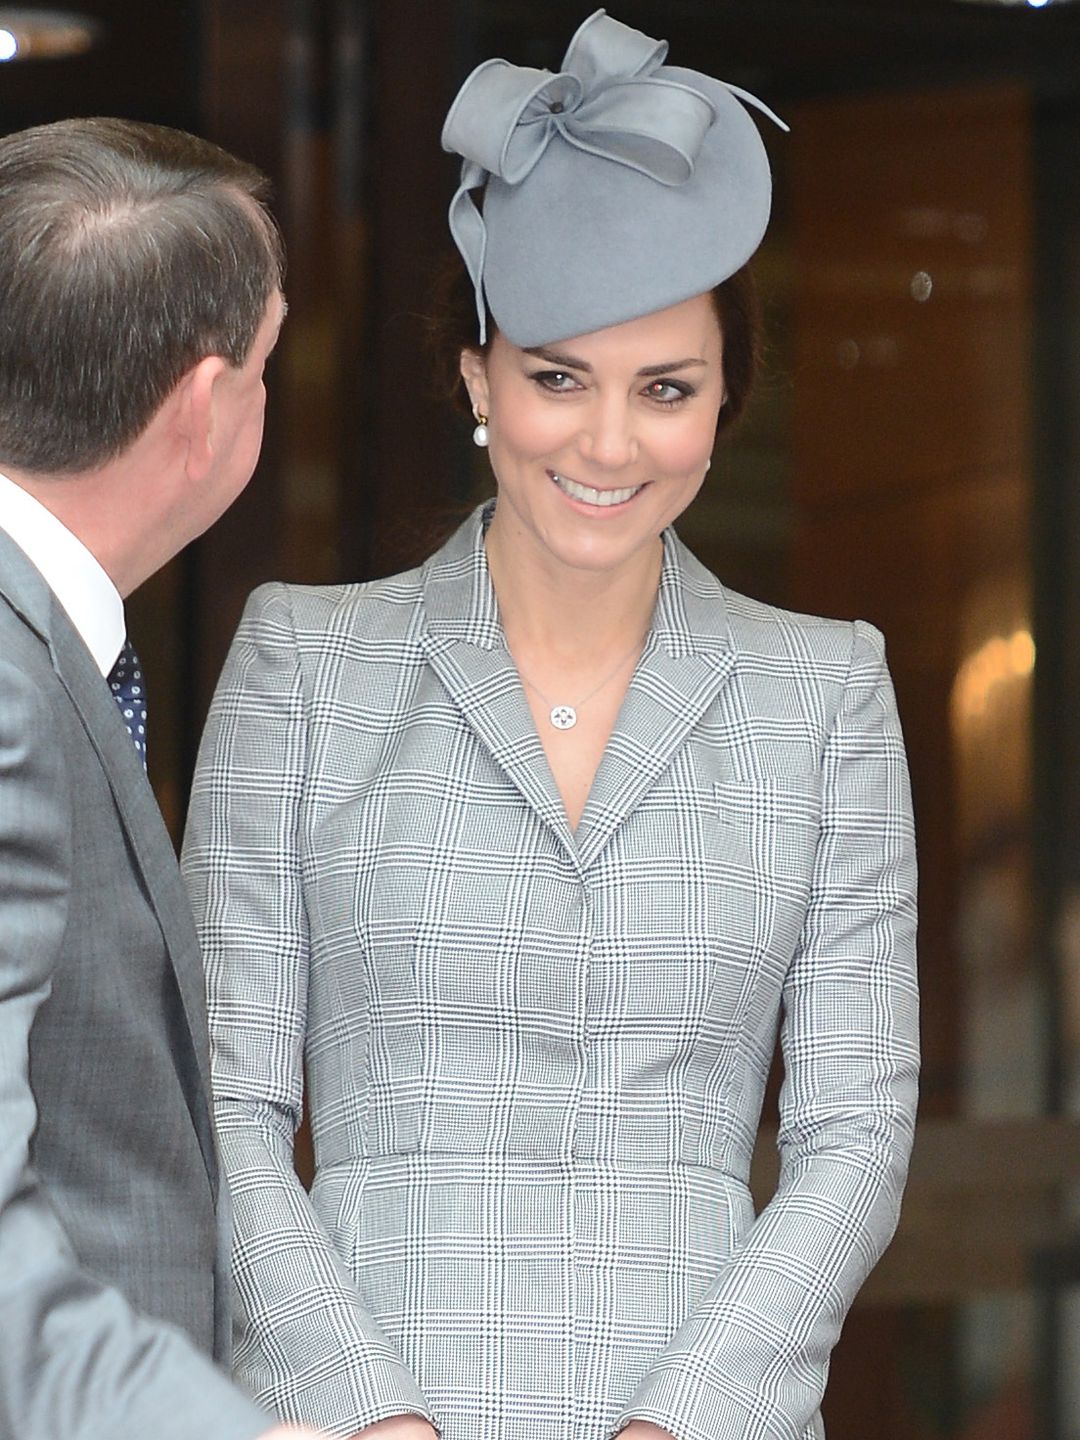 atherine, Duchess Of Cambridge wears a grey suit dress and hat For The State Visit Of The President Of The Republic Of Singapore in 2014